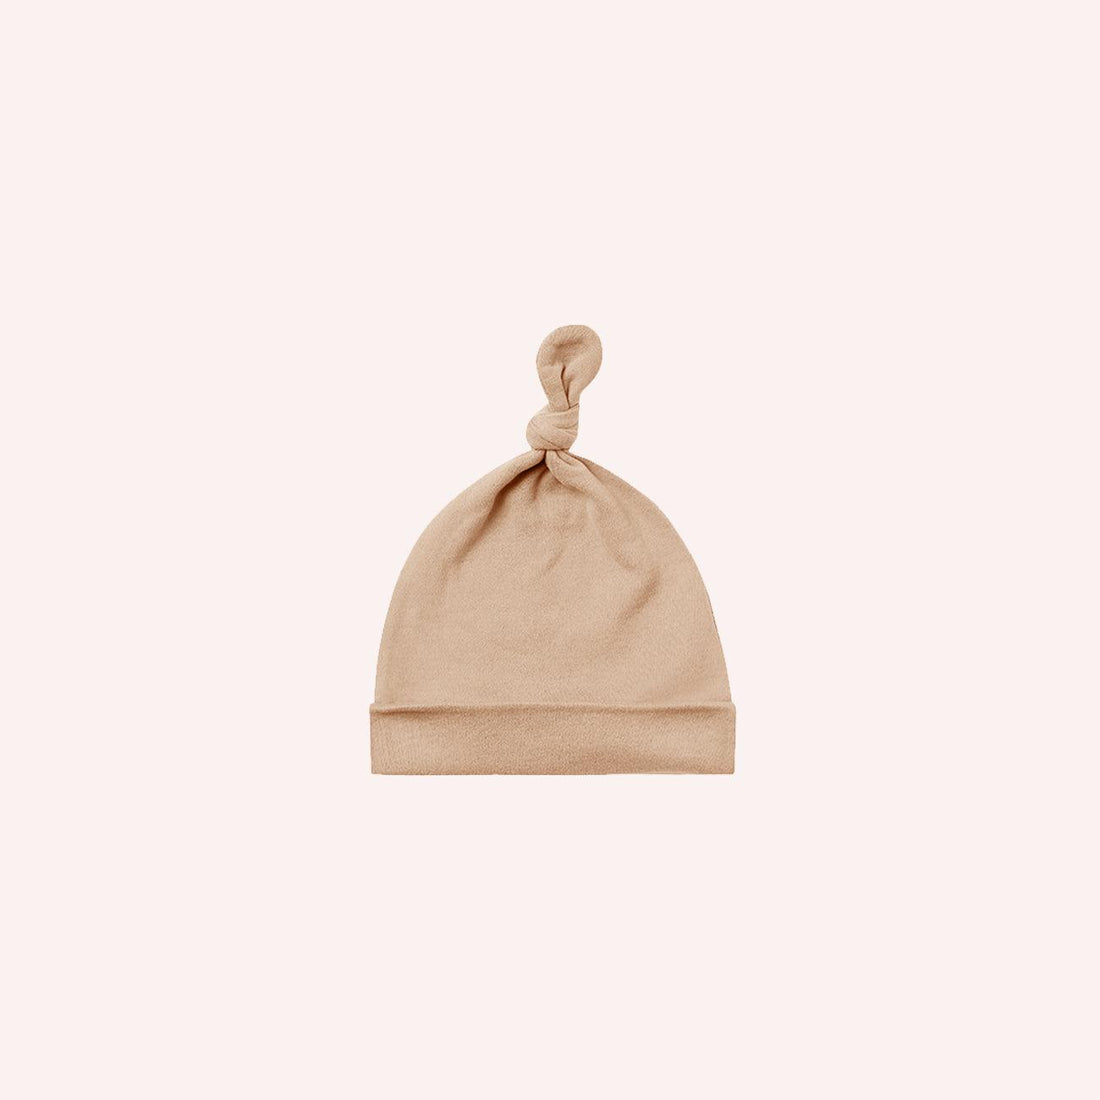 Knotted Baby Hat - Blush